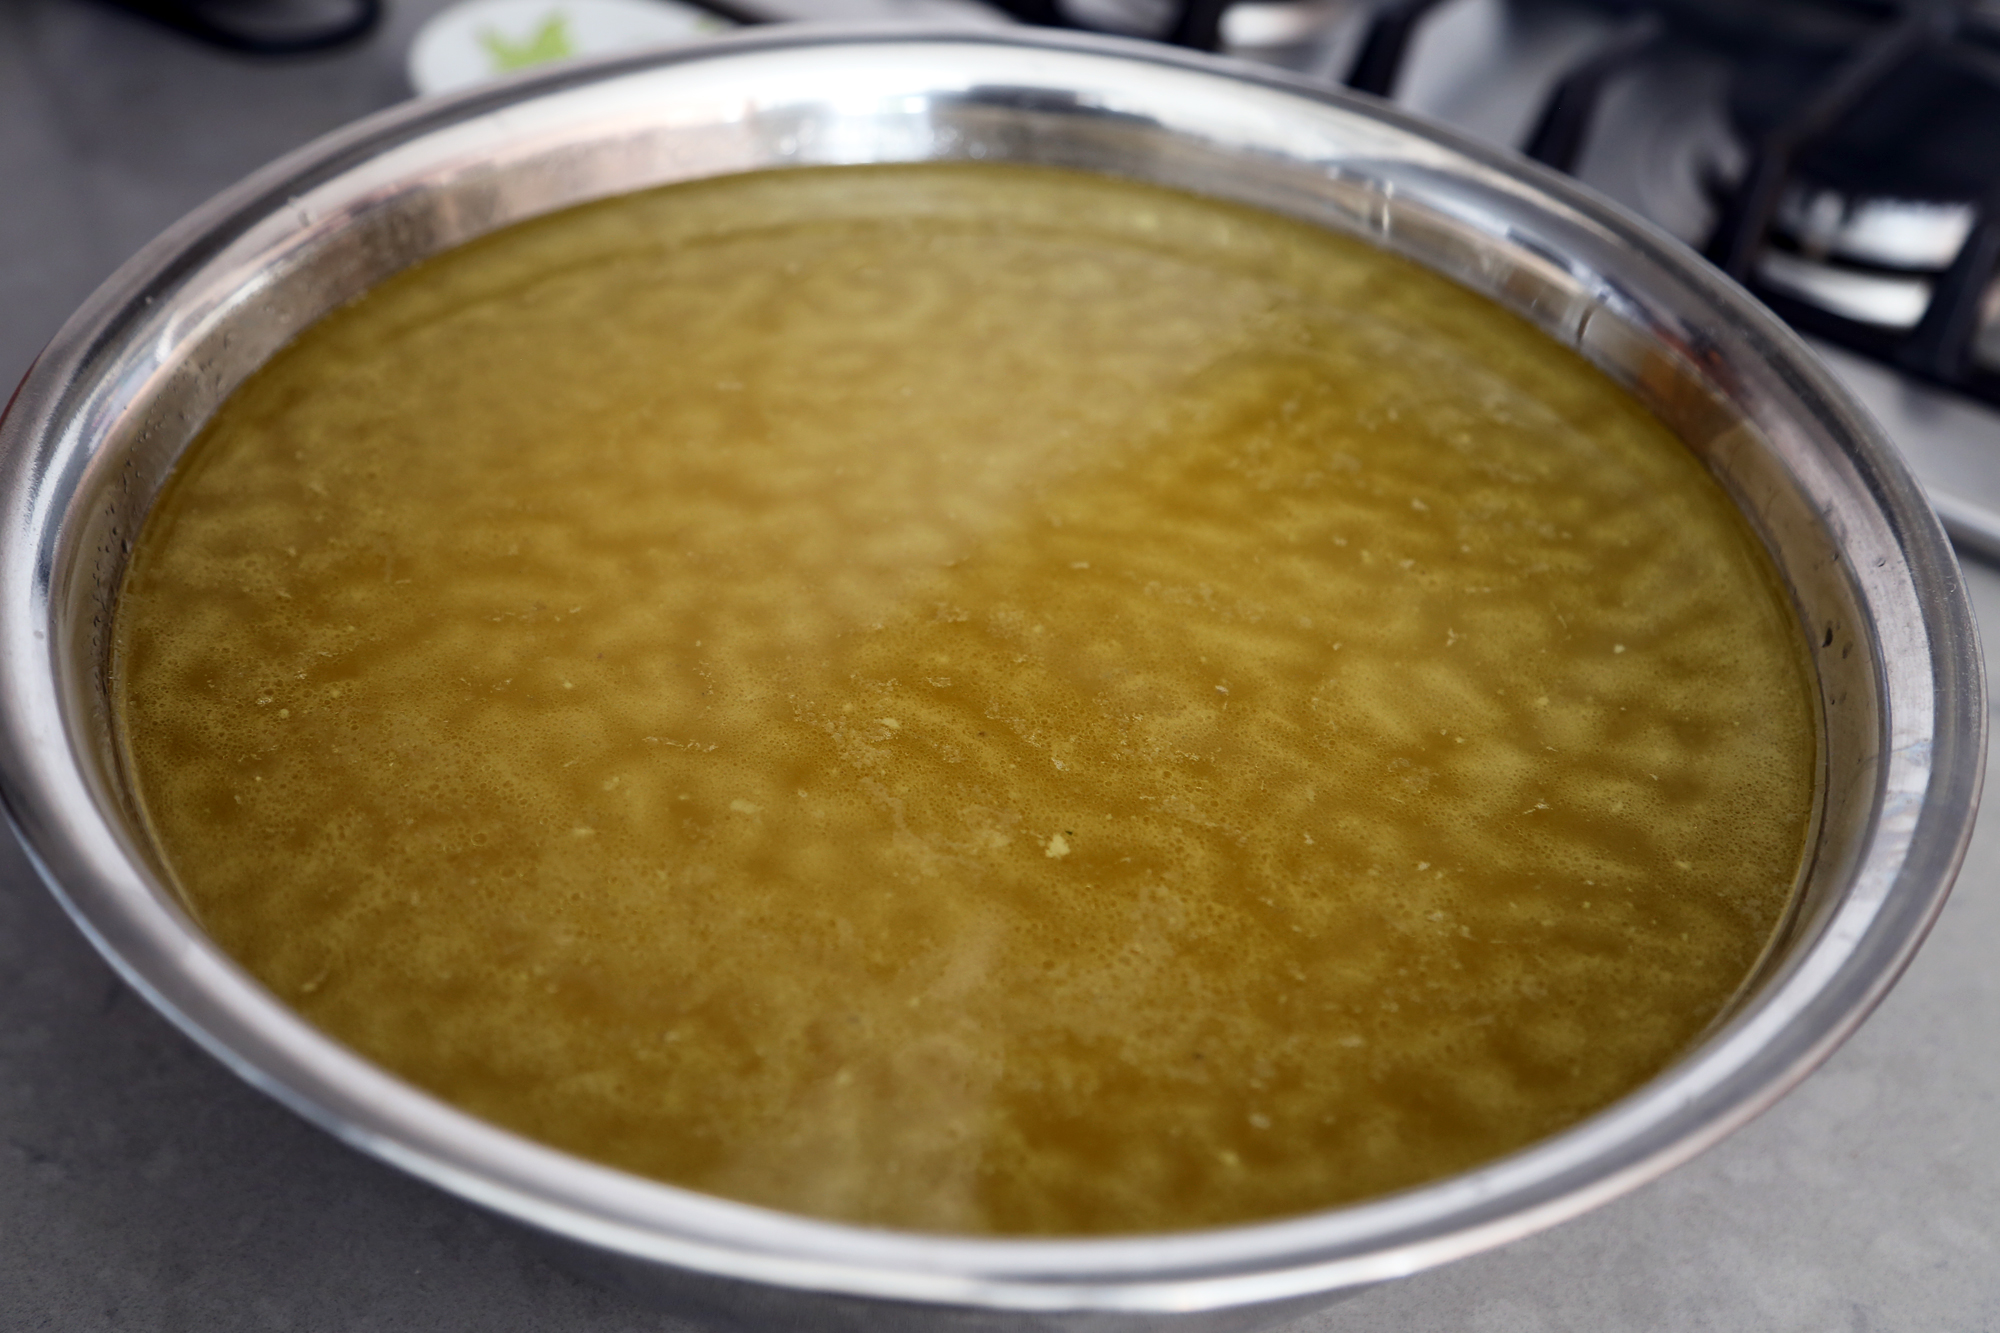 Let the stock cool to room temperature. Refrigerate in the bowl until chilled; remove the layer of fat on top of the stock.